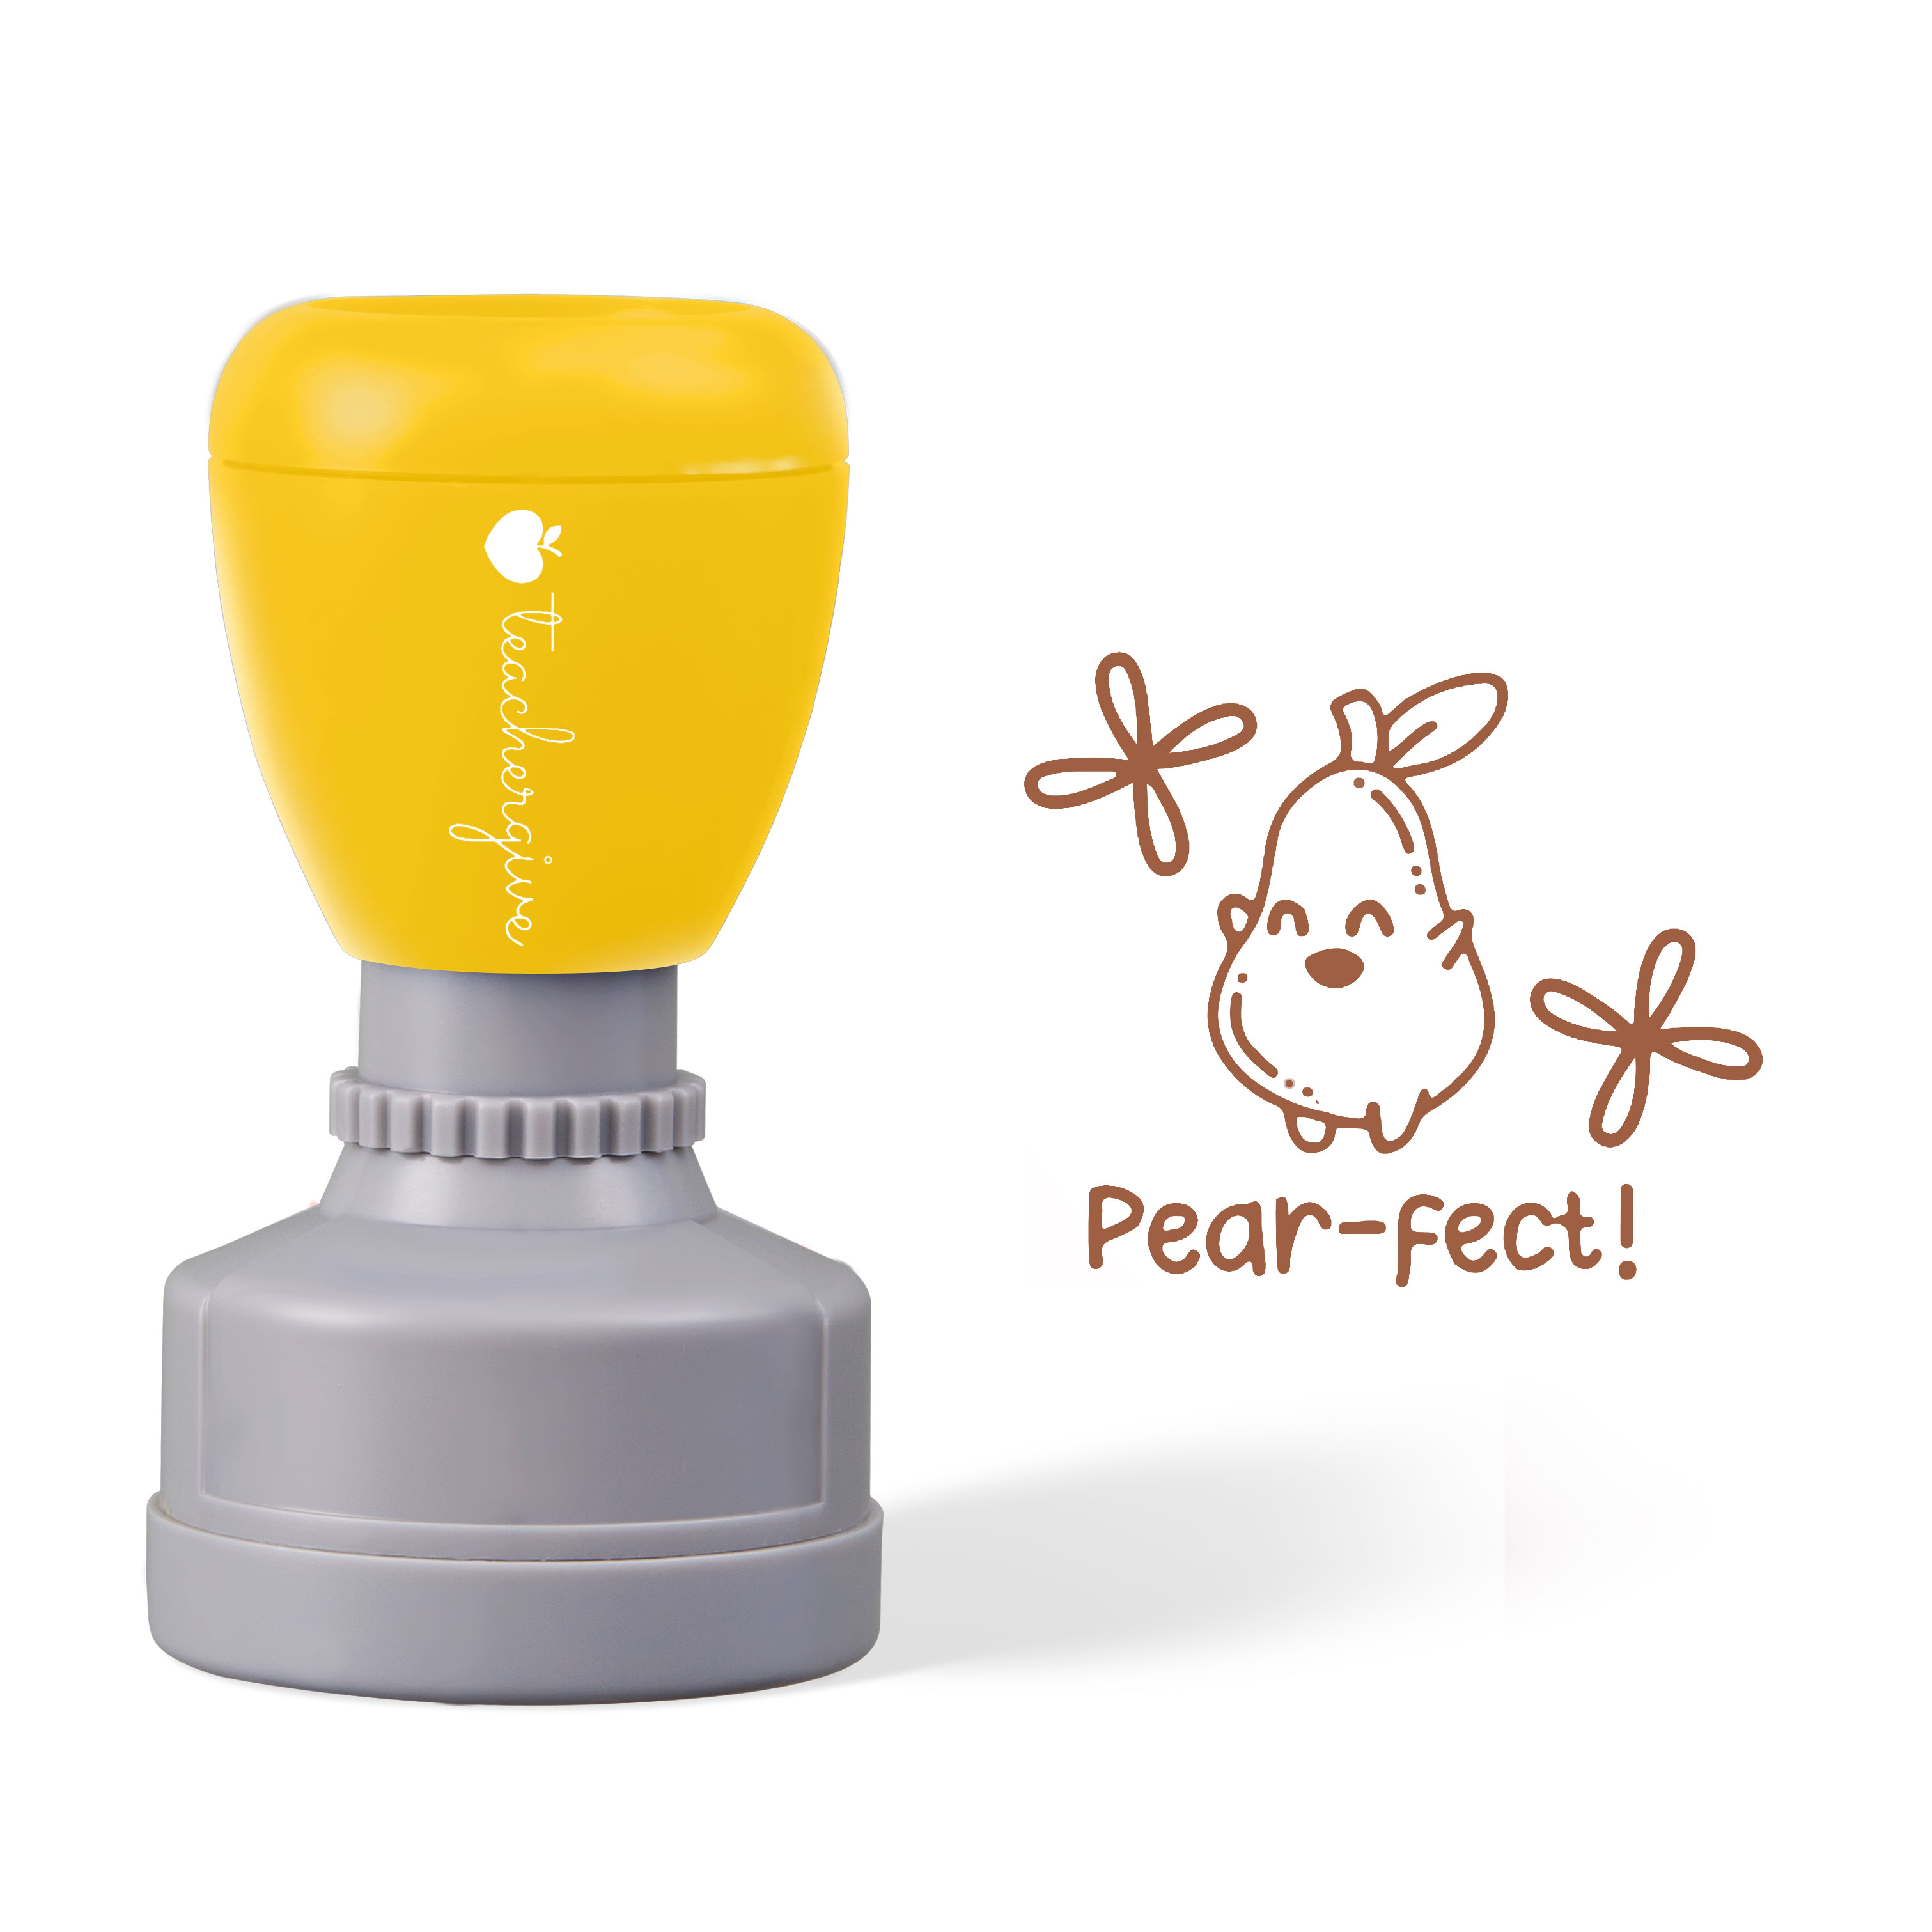 Pear-fect Work Stamp